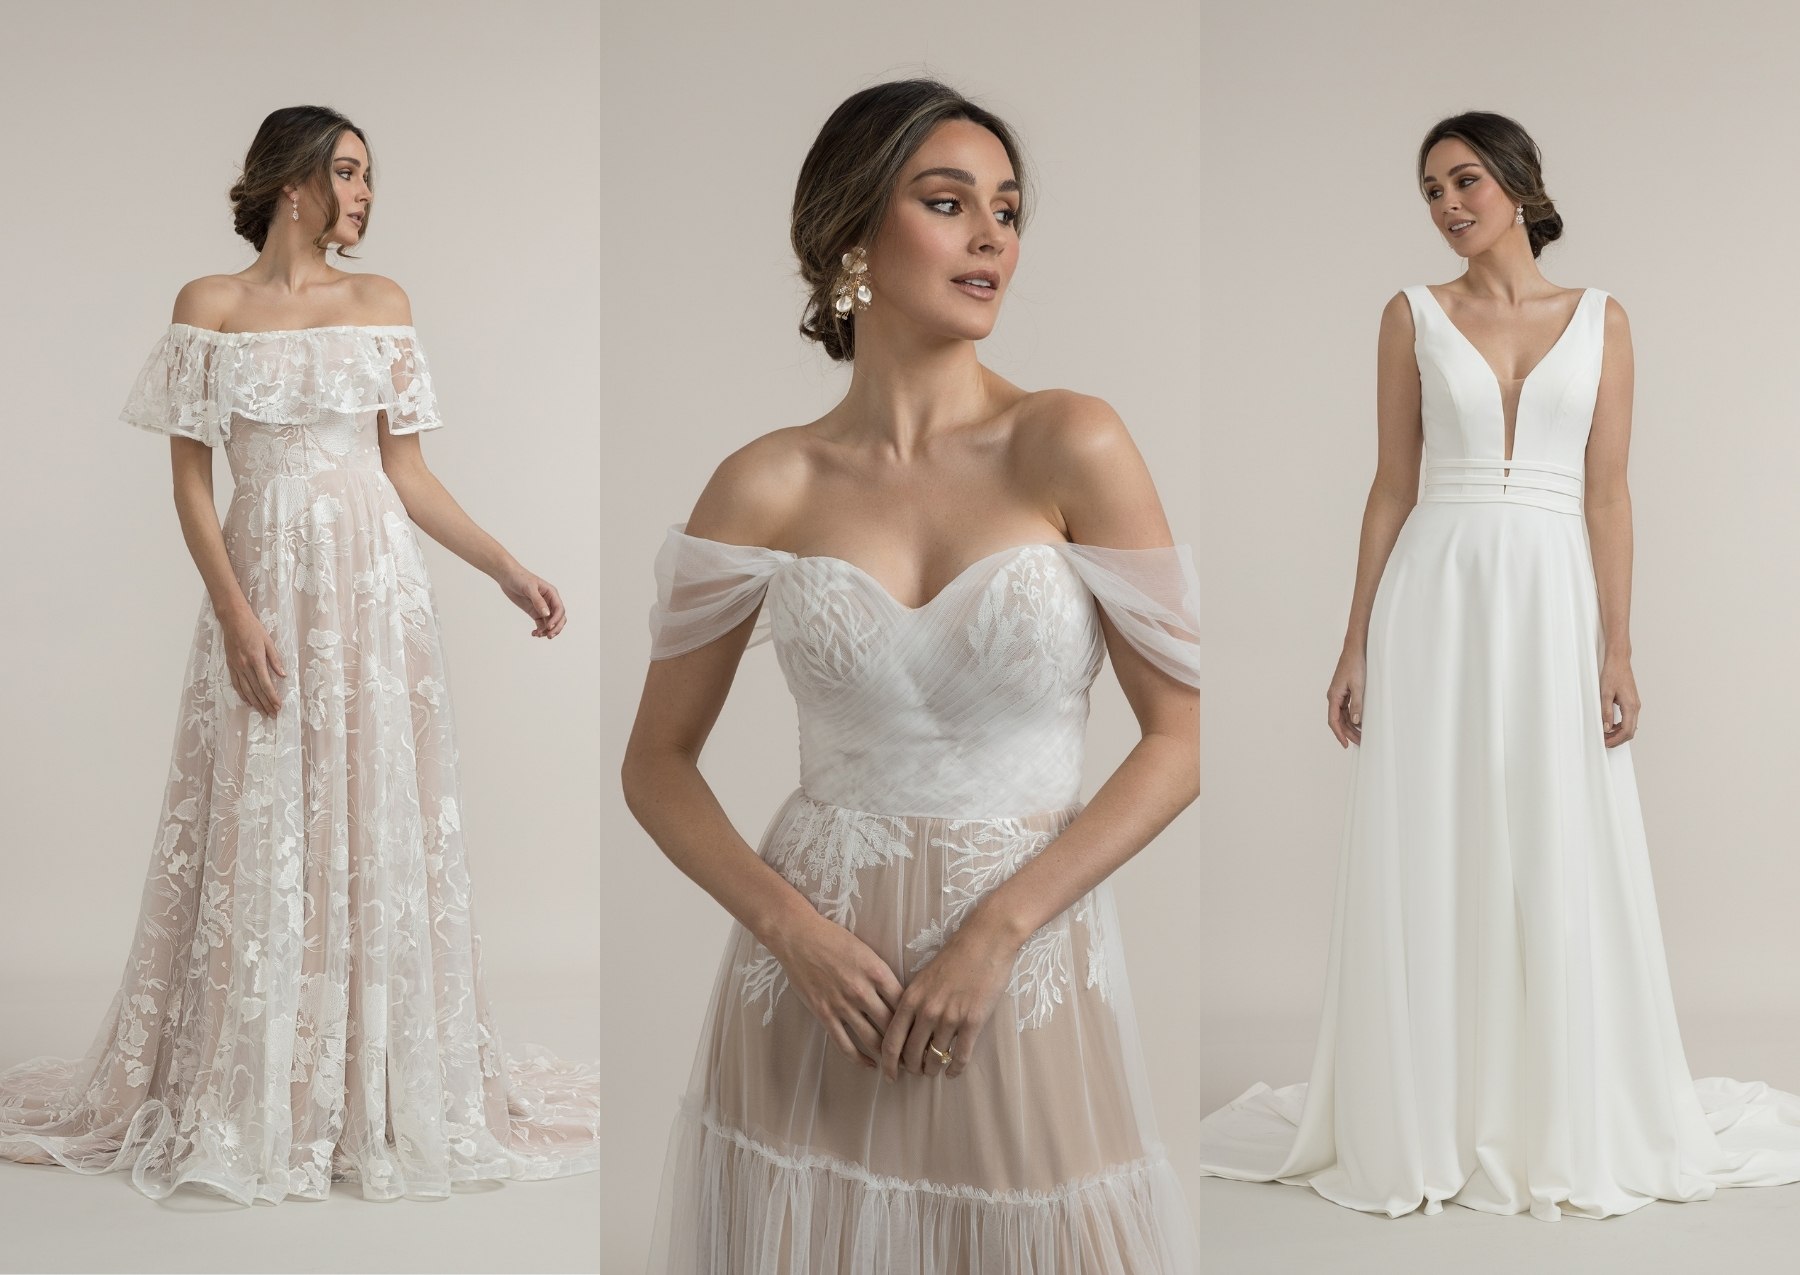 Wedding dress guide - find the right dress for your body shape